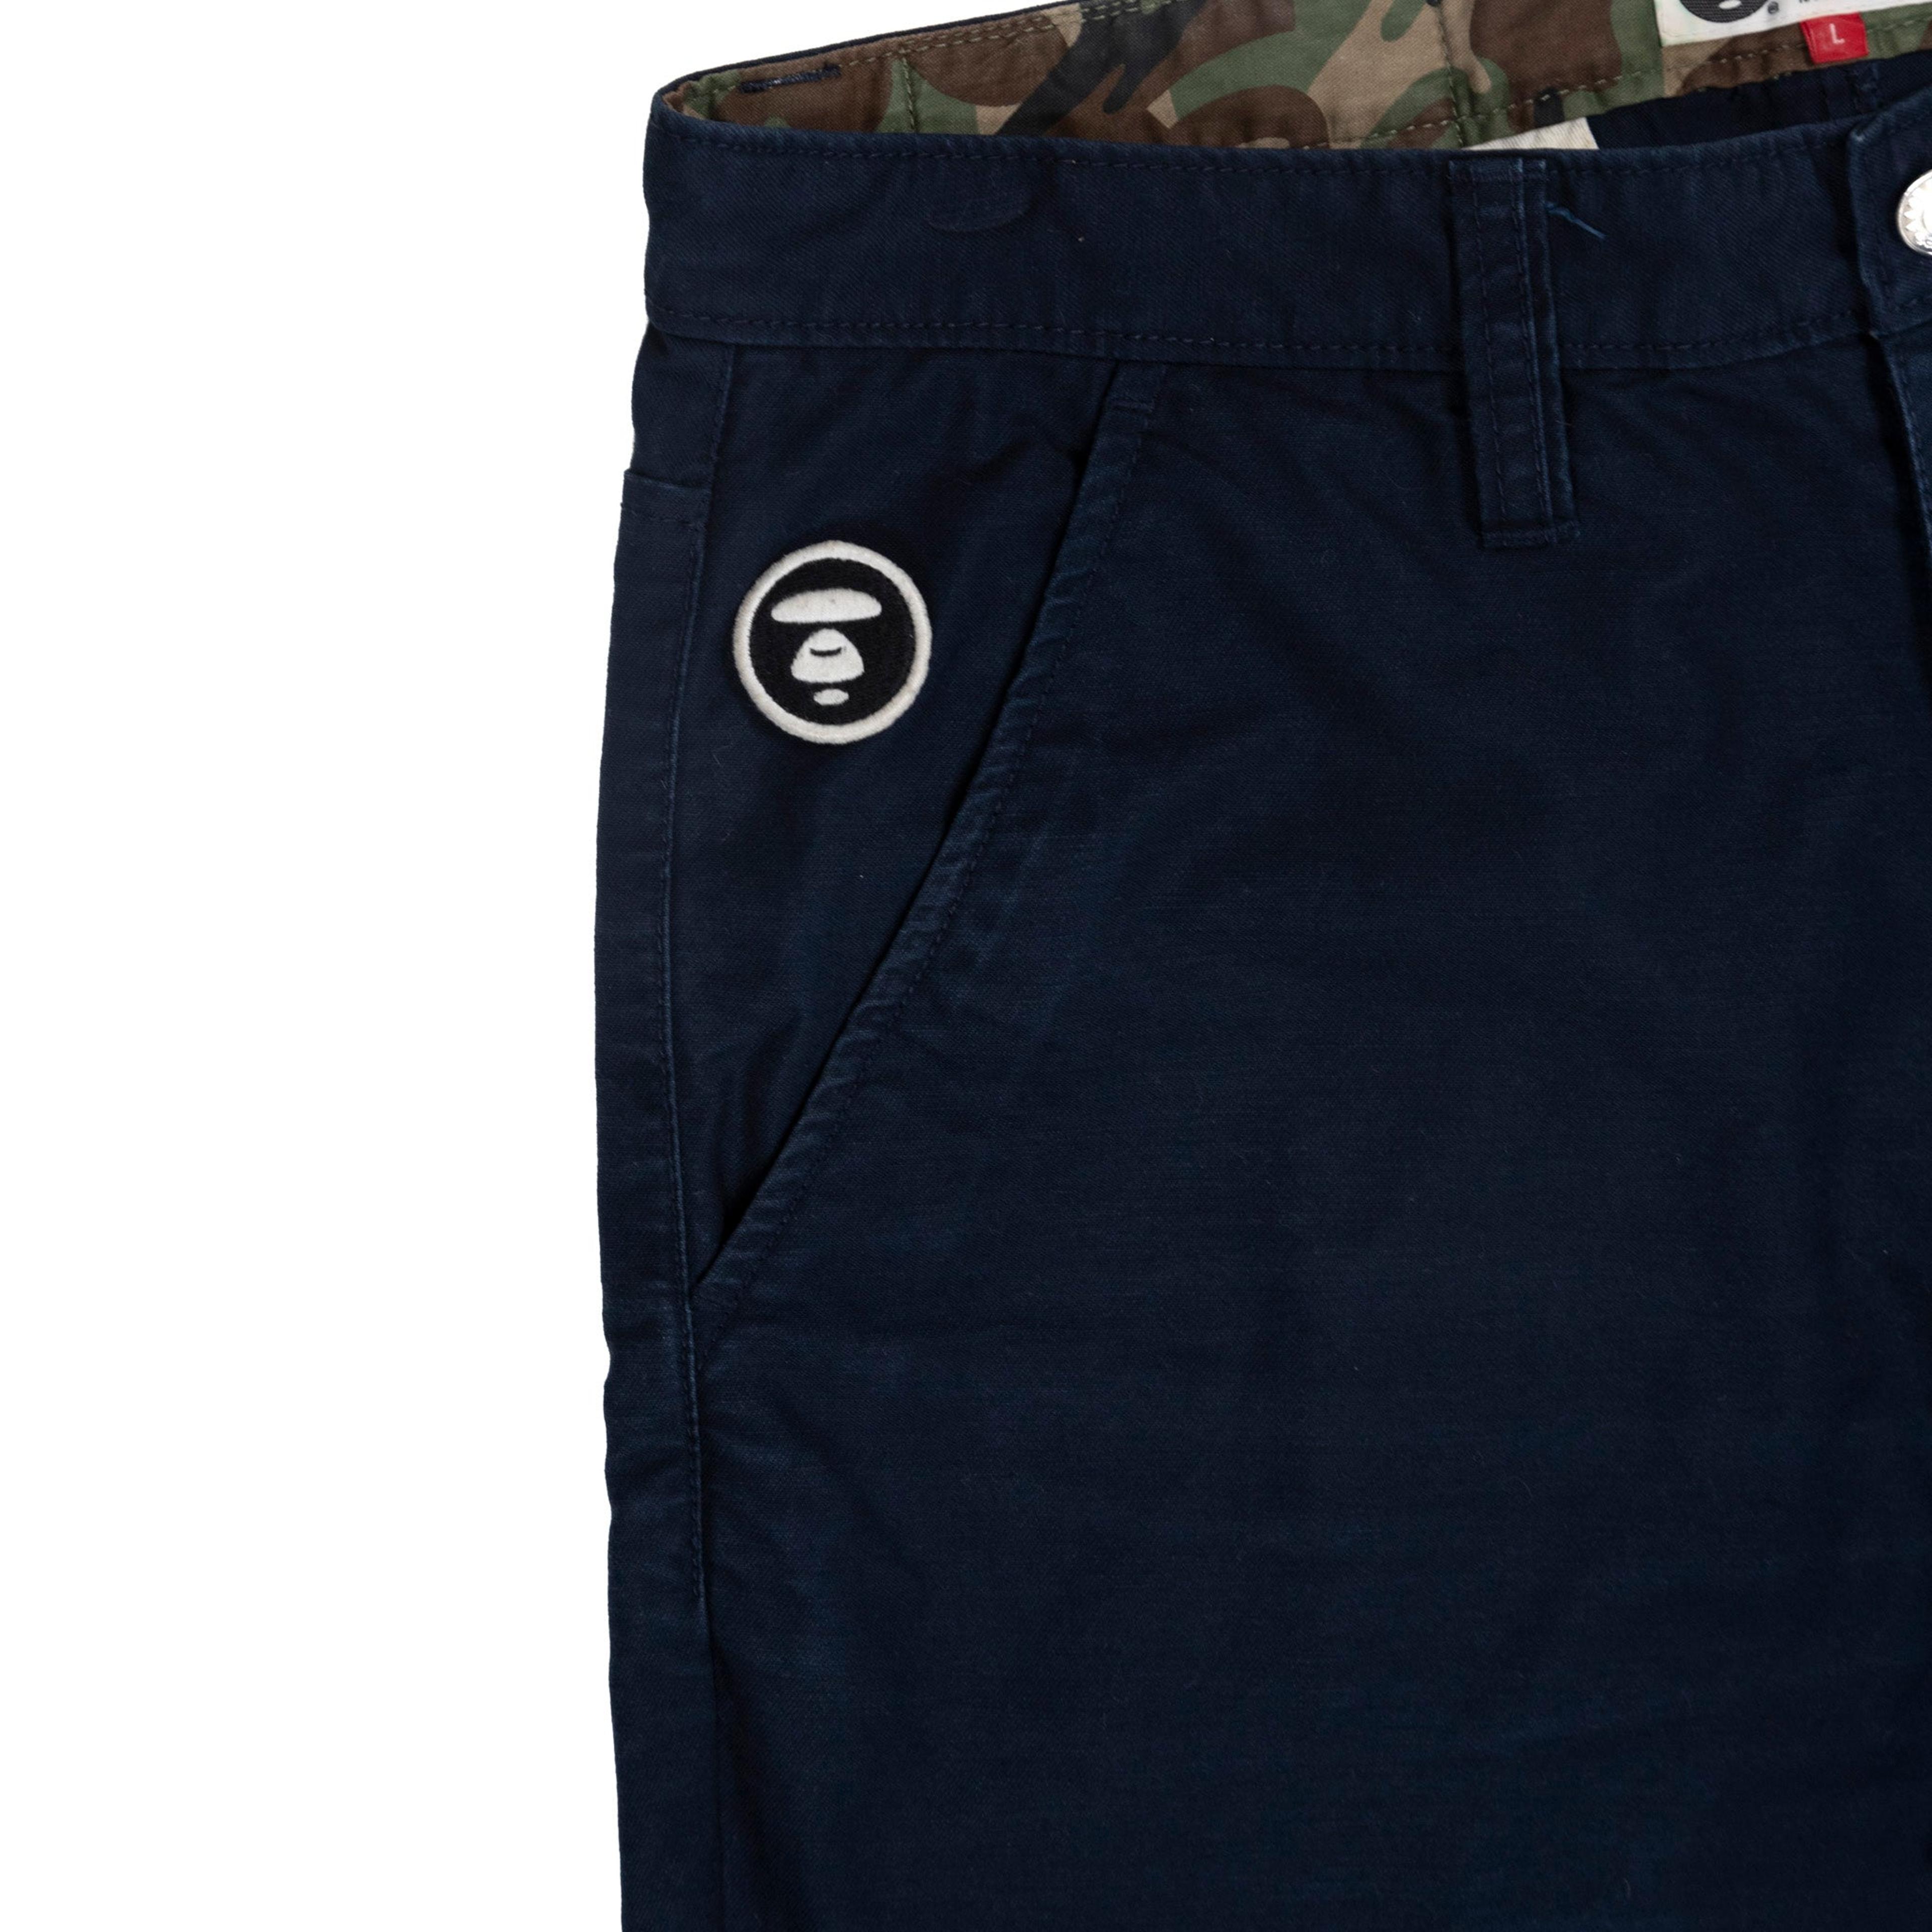 Alternate View 2 of Aape by A Bathing Ape Summer Shorts